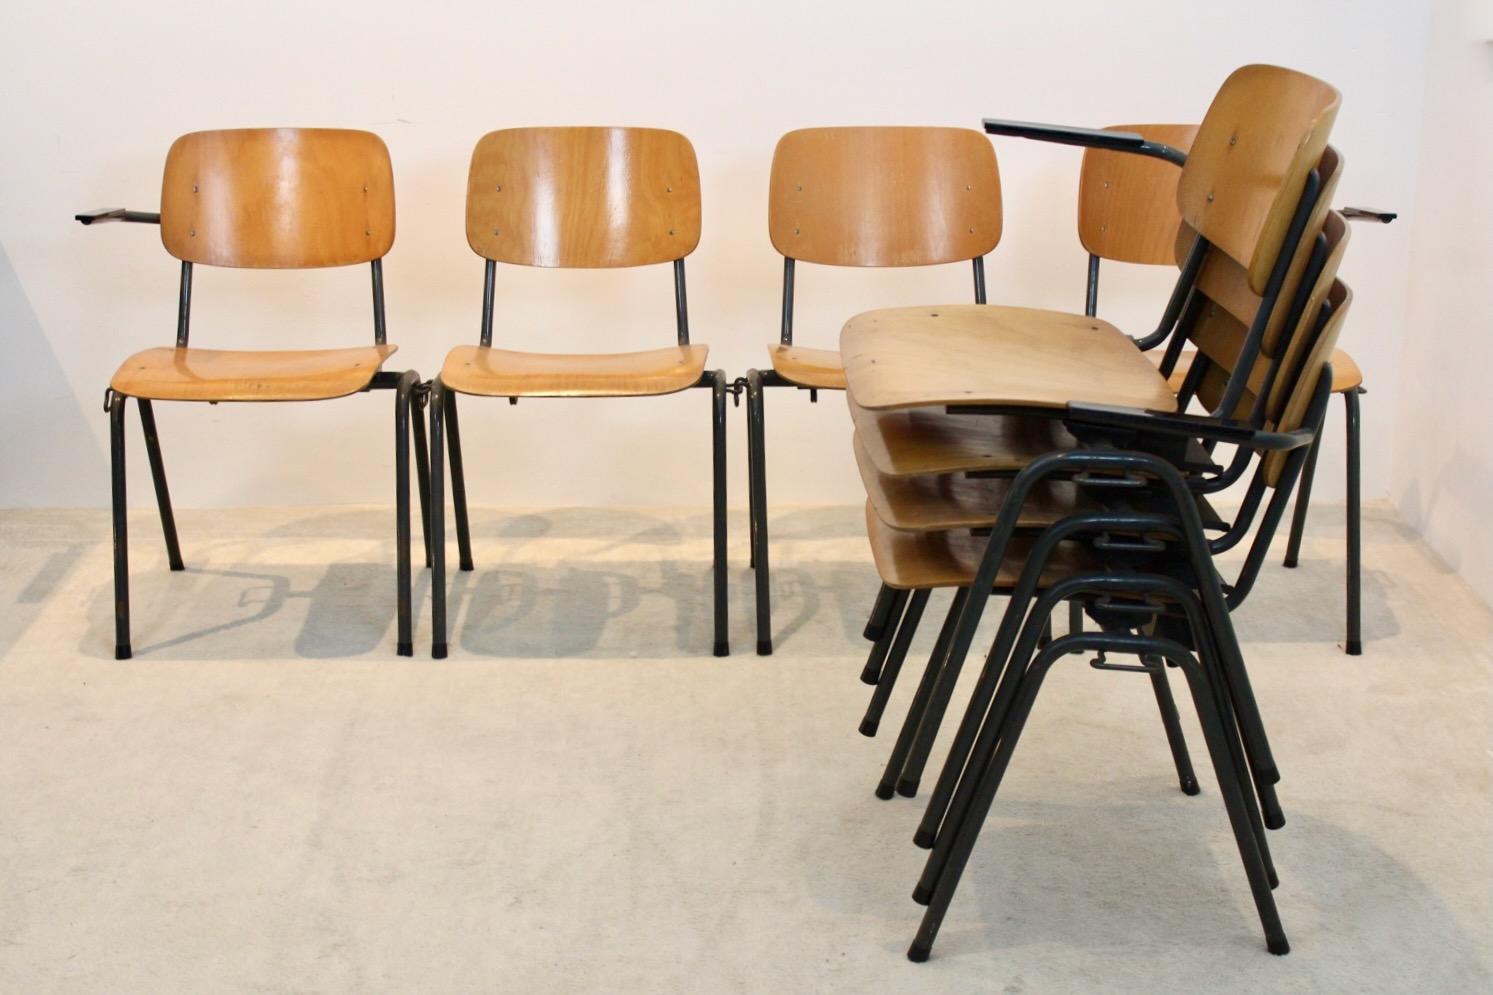 plywood chair seats